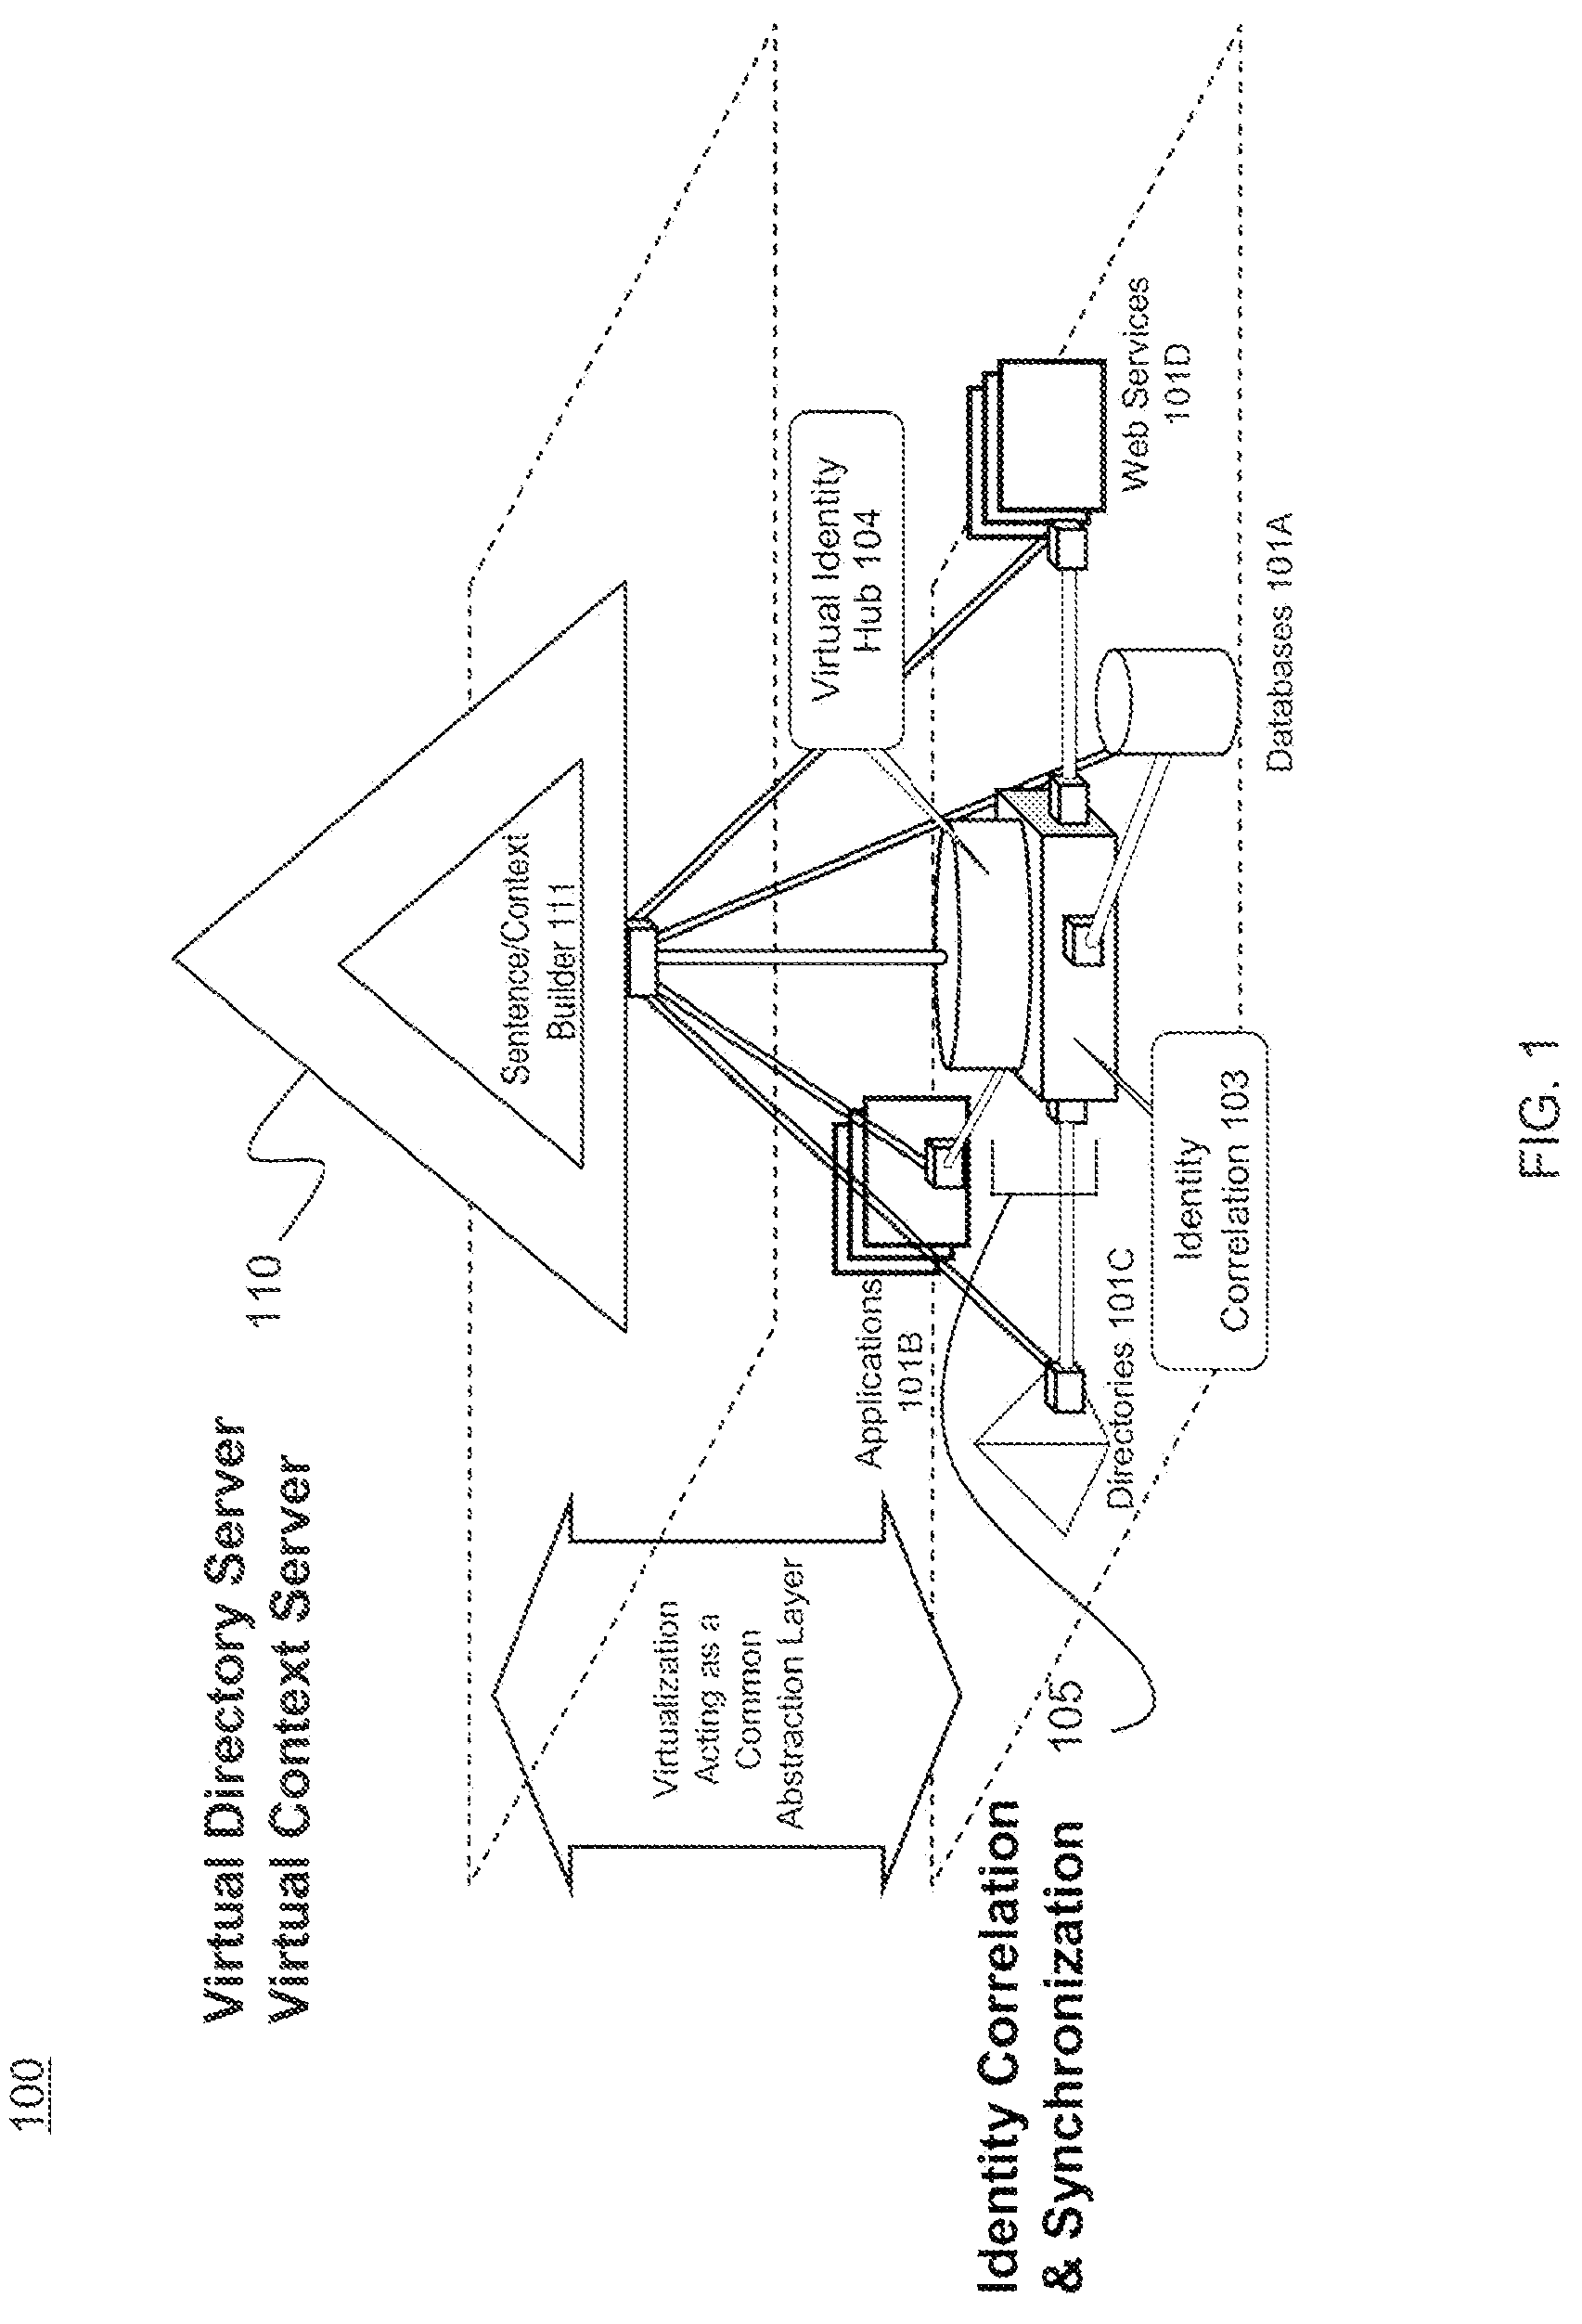 Representation of objects and relationships in databases, directories, web services, and applications as sentences as a method to represent context in structured data